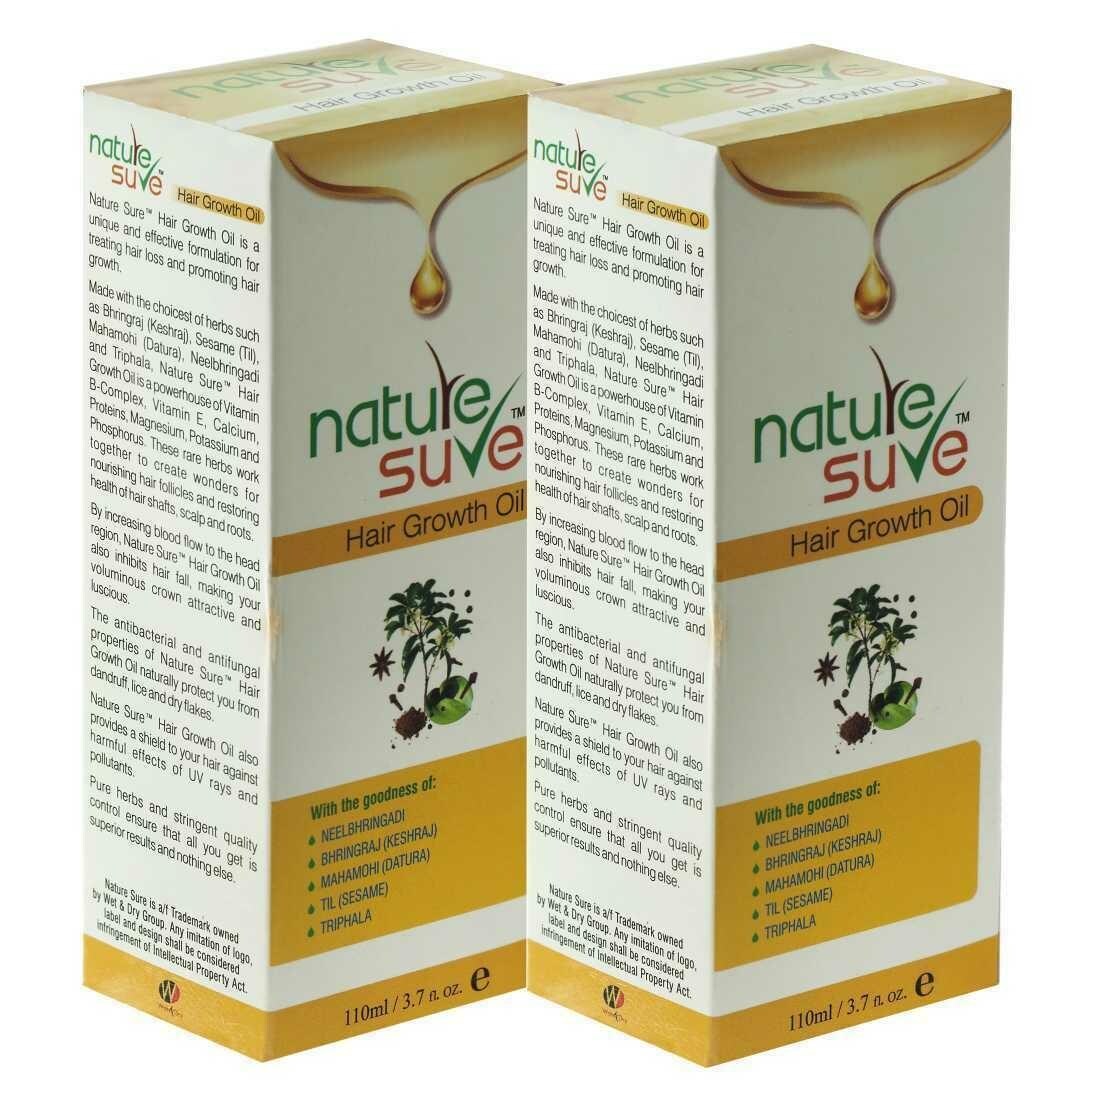 Nature Sure Hair Growth Oil for Darker and Stronger Hair in Men and Women -  2 Packs (110 ml each) - JioMart